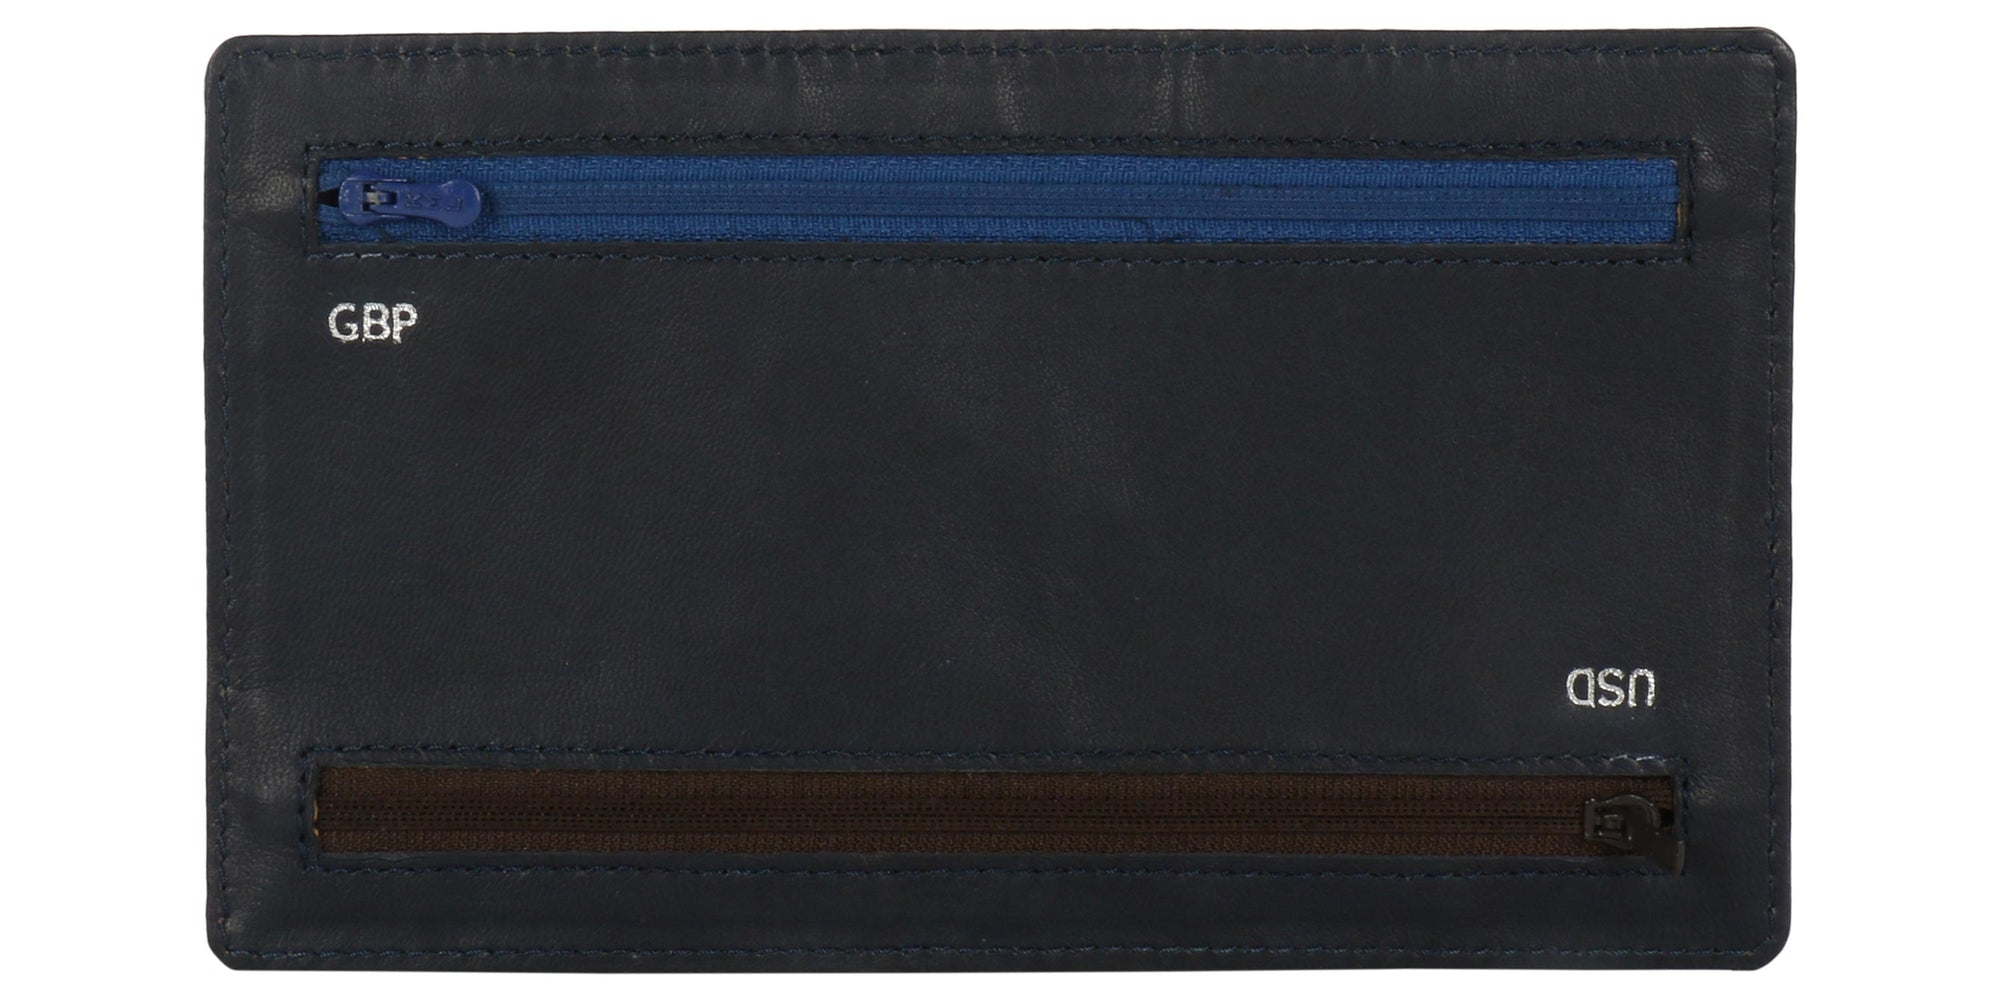 Back side view of  4  Zip Multi currency wallet. Two  Zip Blue and Brown in color visible. Blue Zip is meant for GBP currency It  is positioned on top of wallet. Brown zip is meant for USD currency and positioned at bottom.